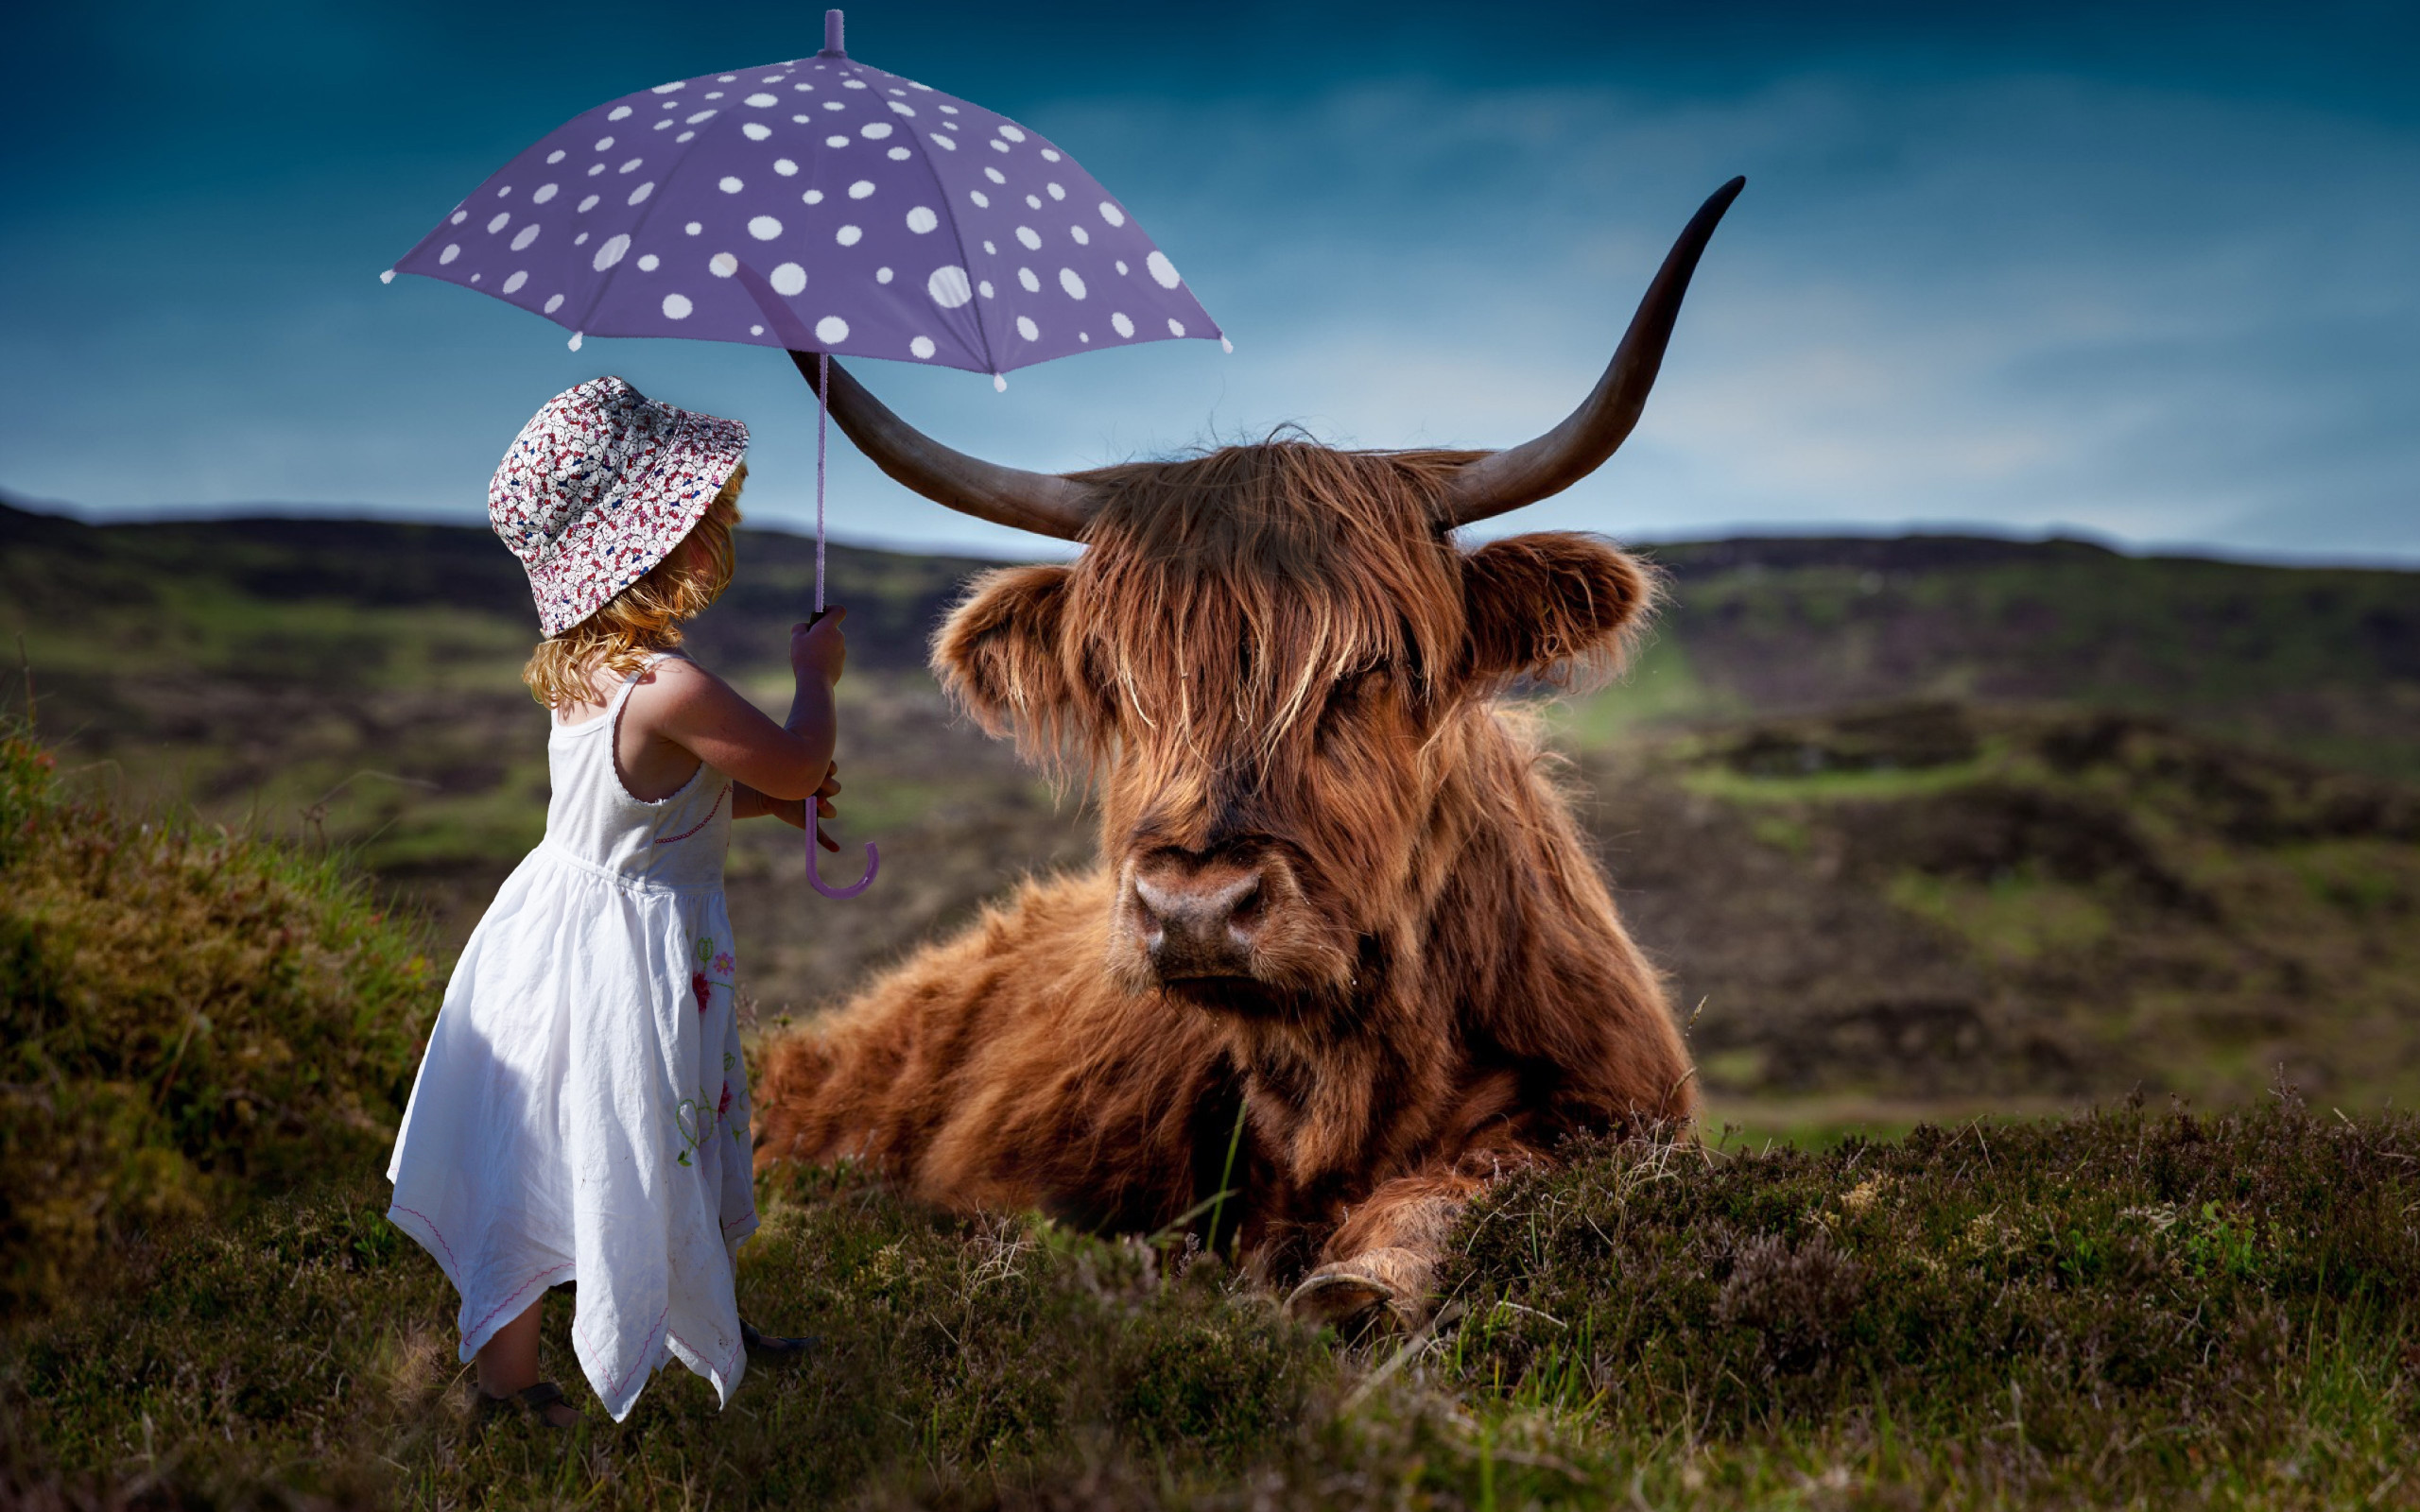 Child with the umbrella and the funny cow wallpaper 2560x1600